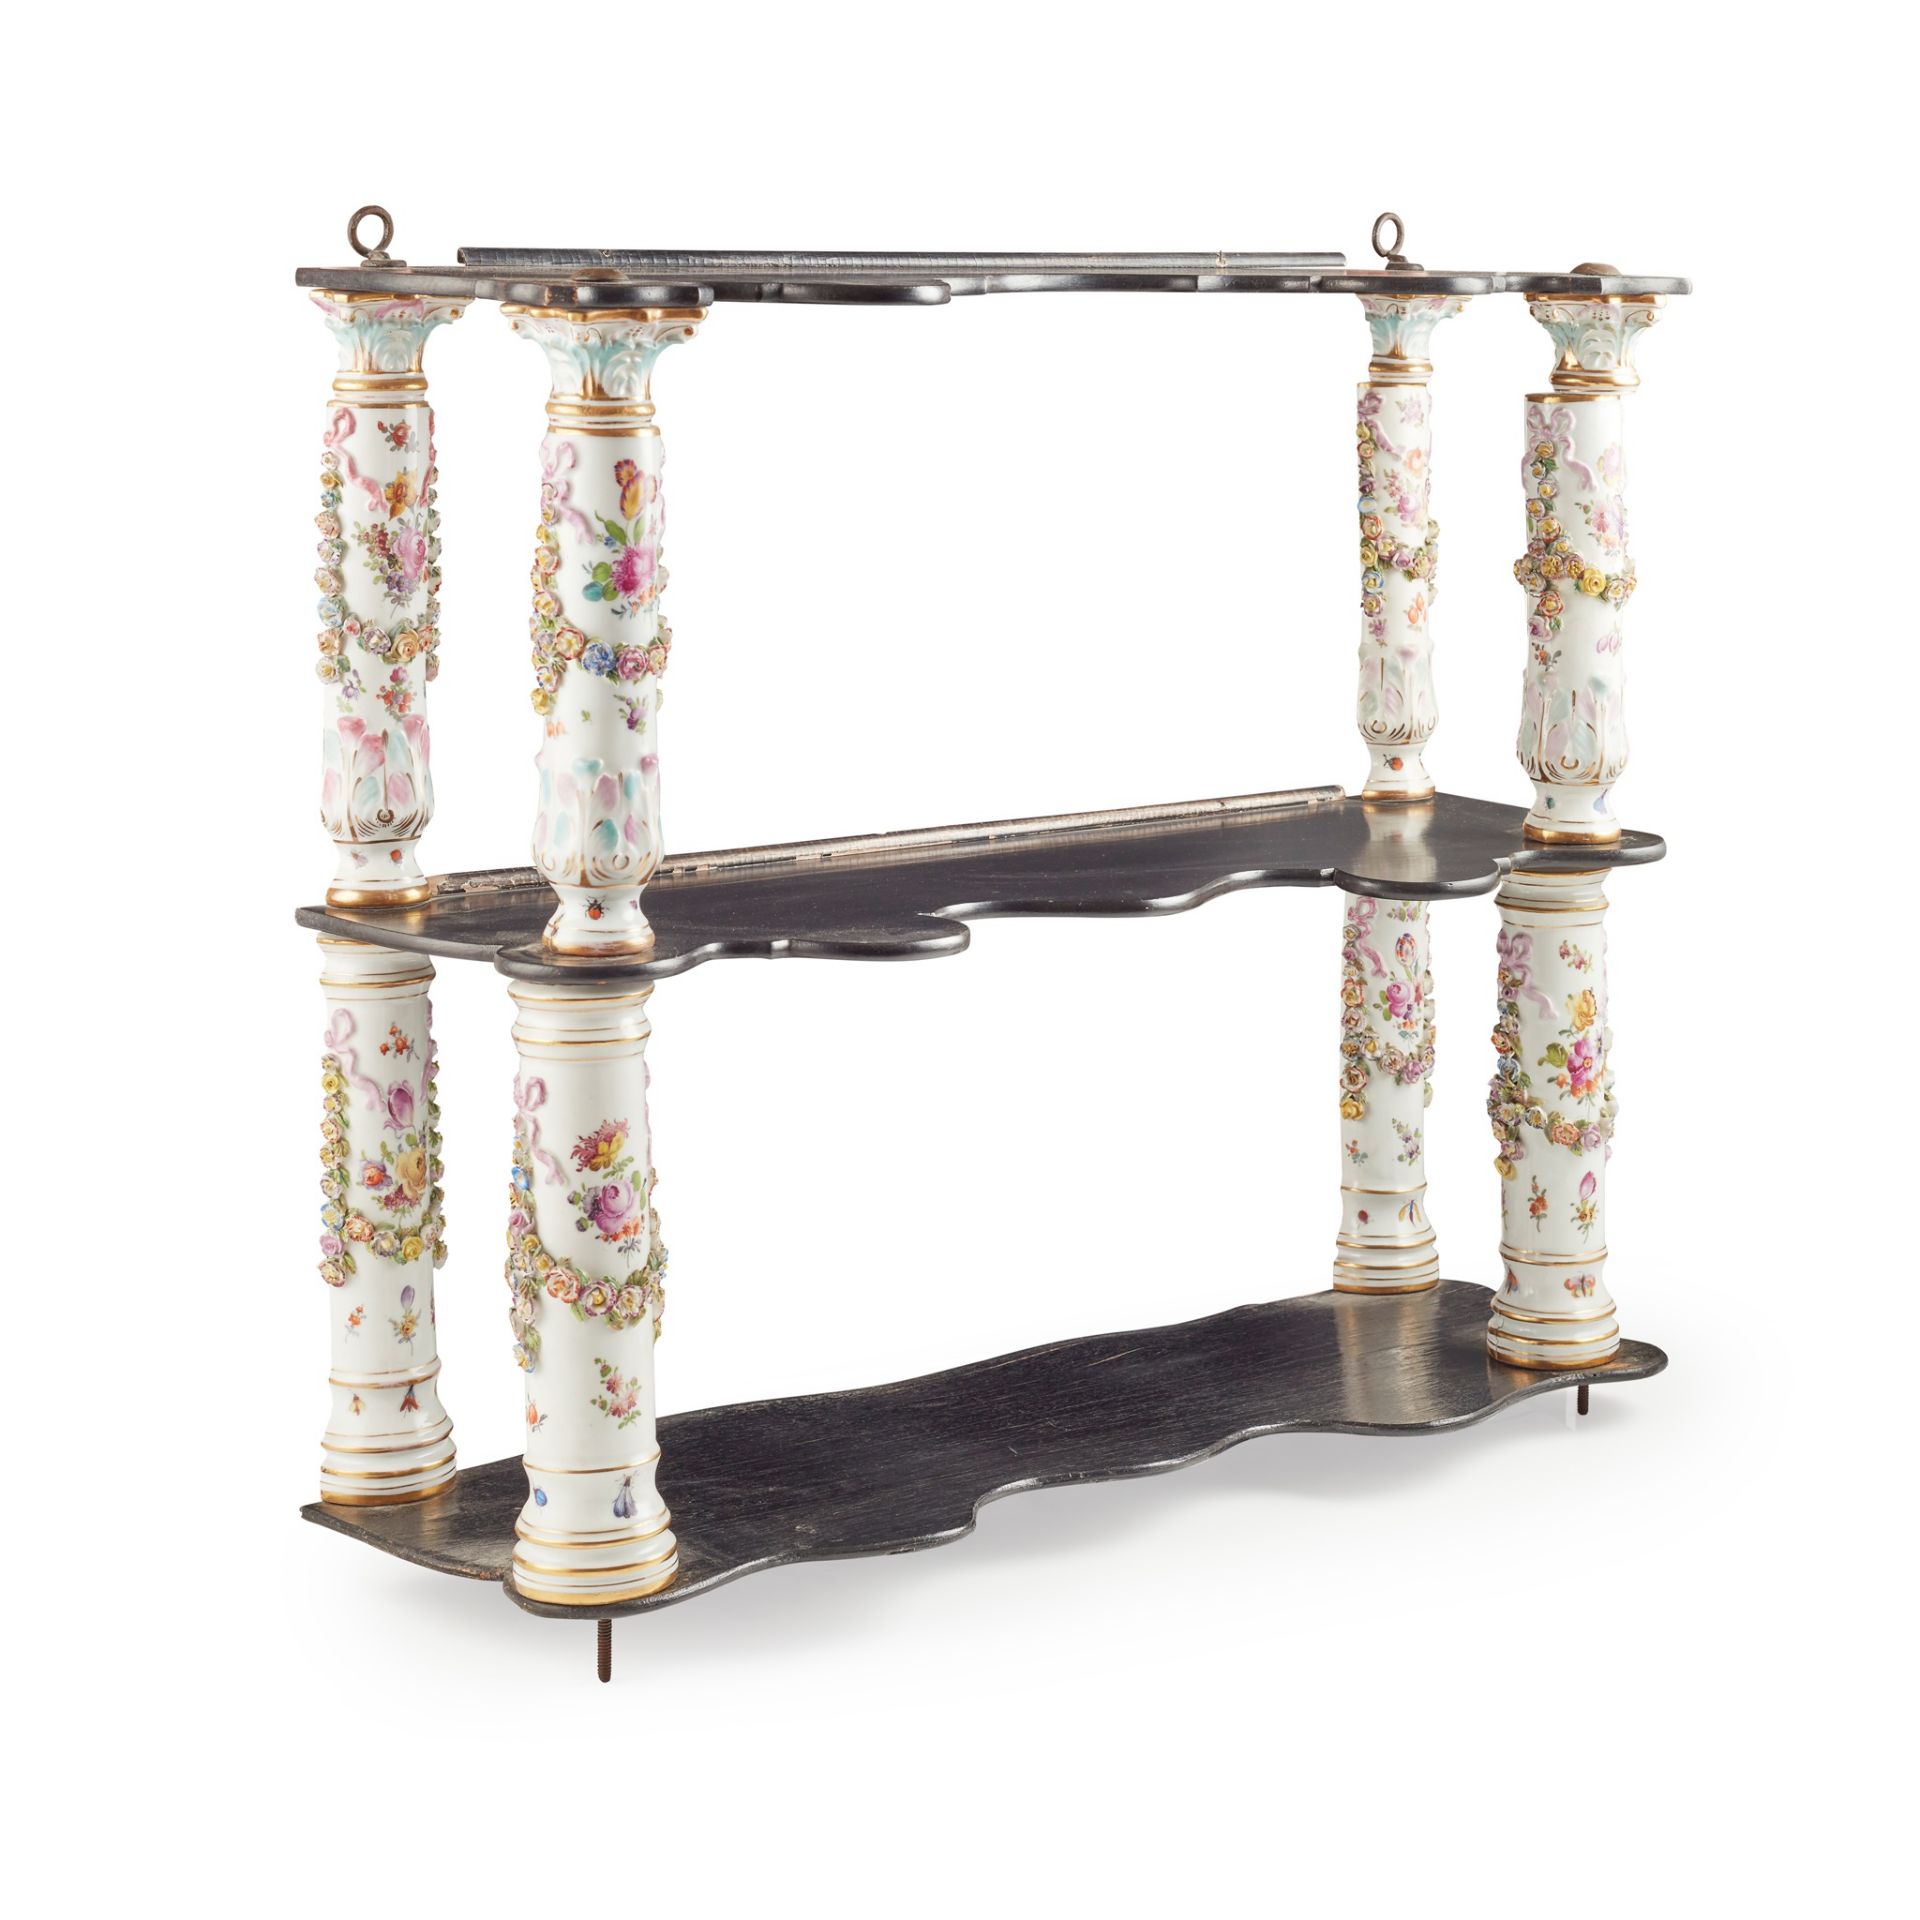 DRESDEN PORCELAIN MOUNTED WALL SHELF LATE 19TH/ EARLY 20TH CENTURY